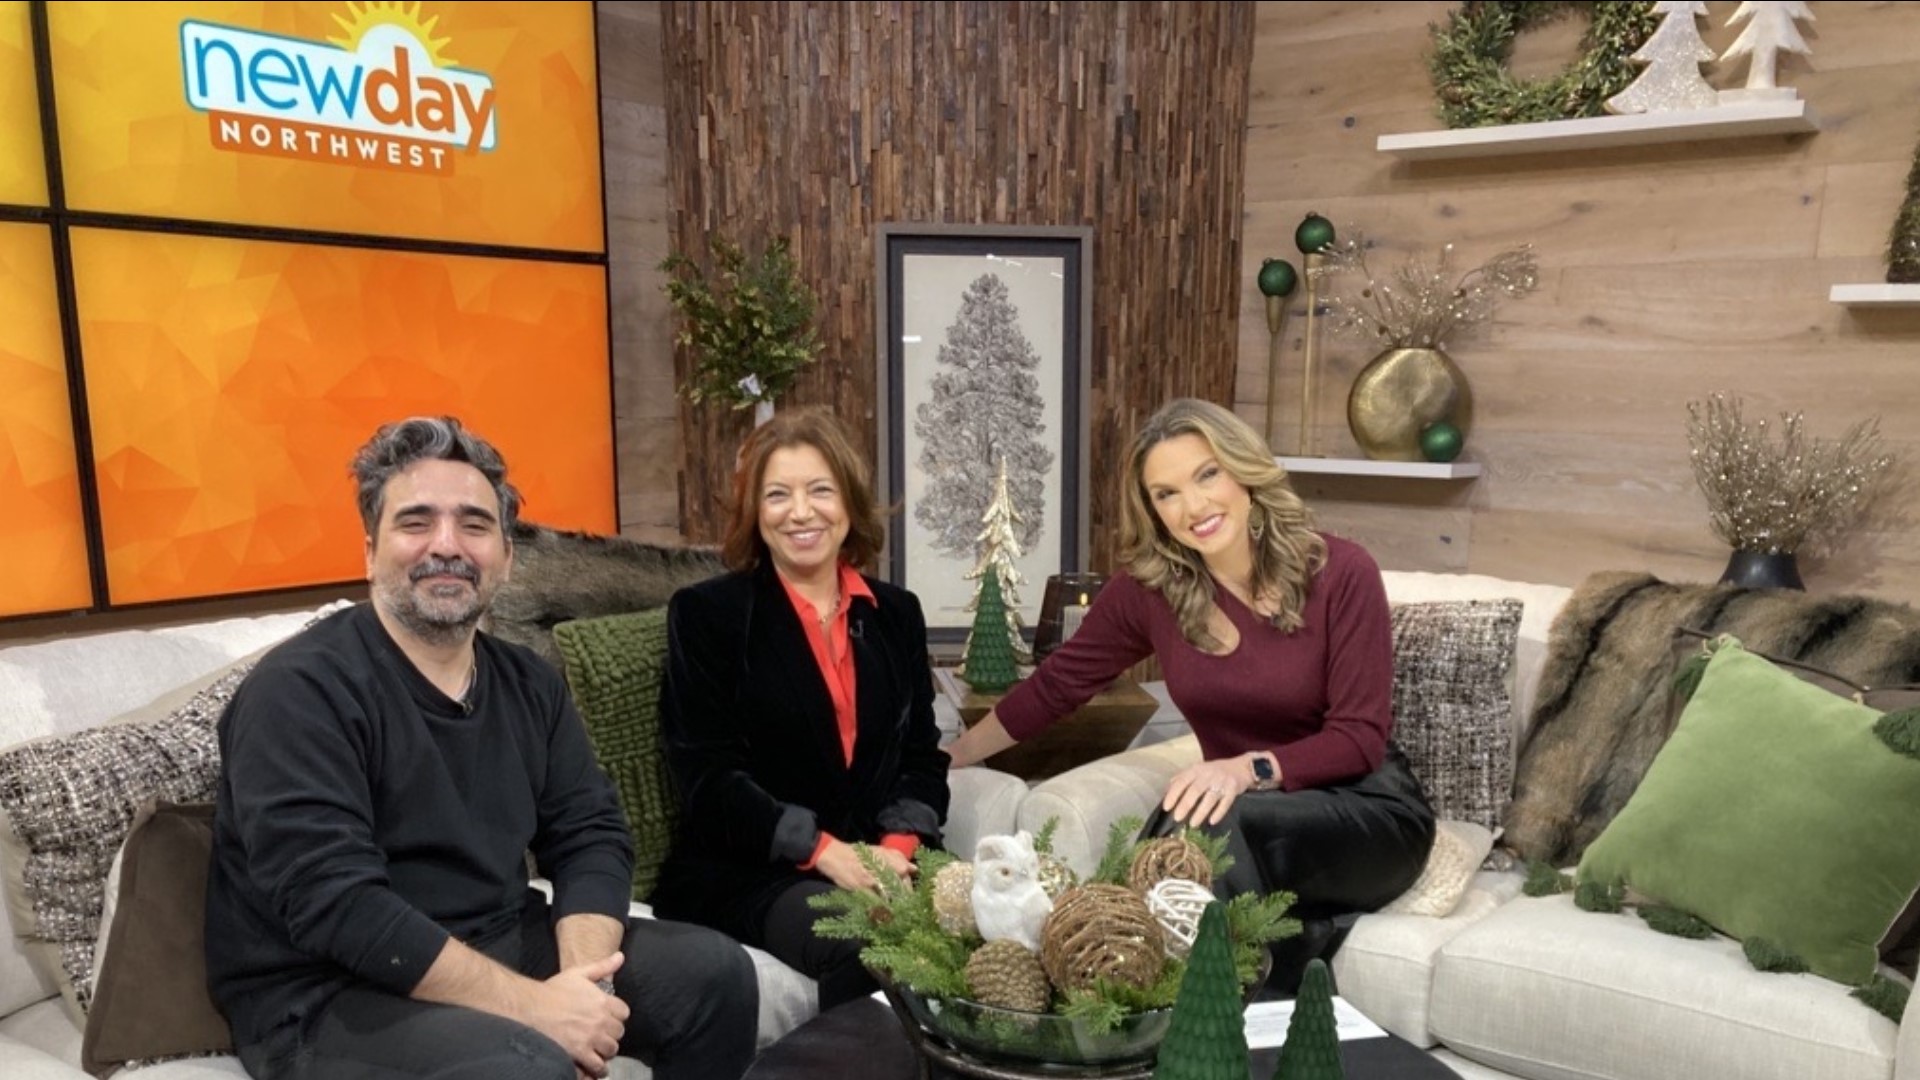 Demet Kitis and film director Cem Kaya from the Seattle Turkish Film Festival chat about what viewers can expect. #newdaynw